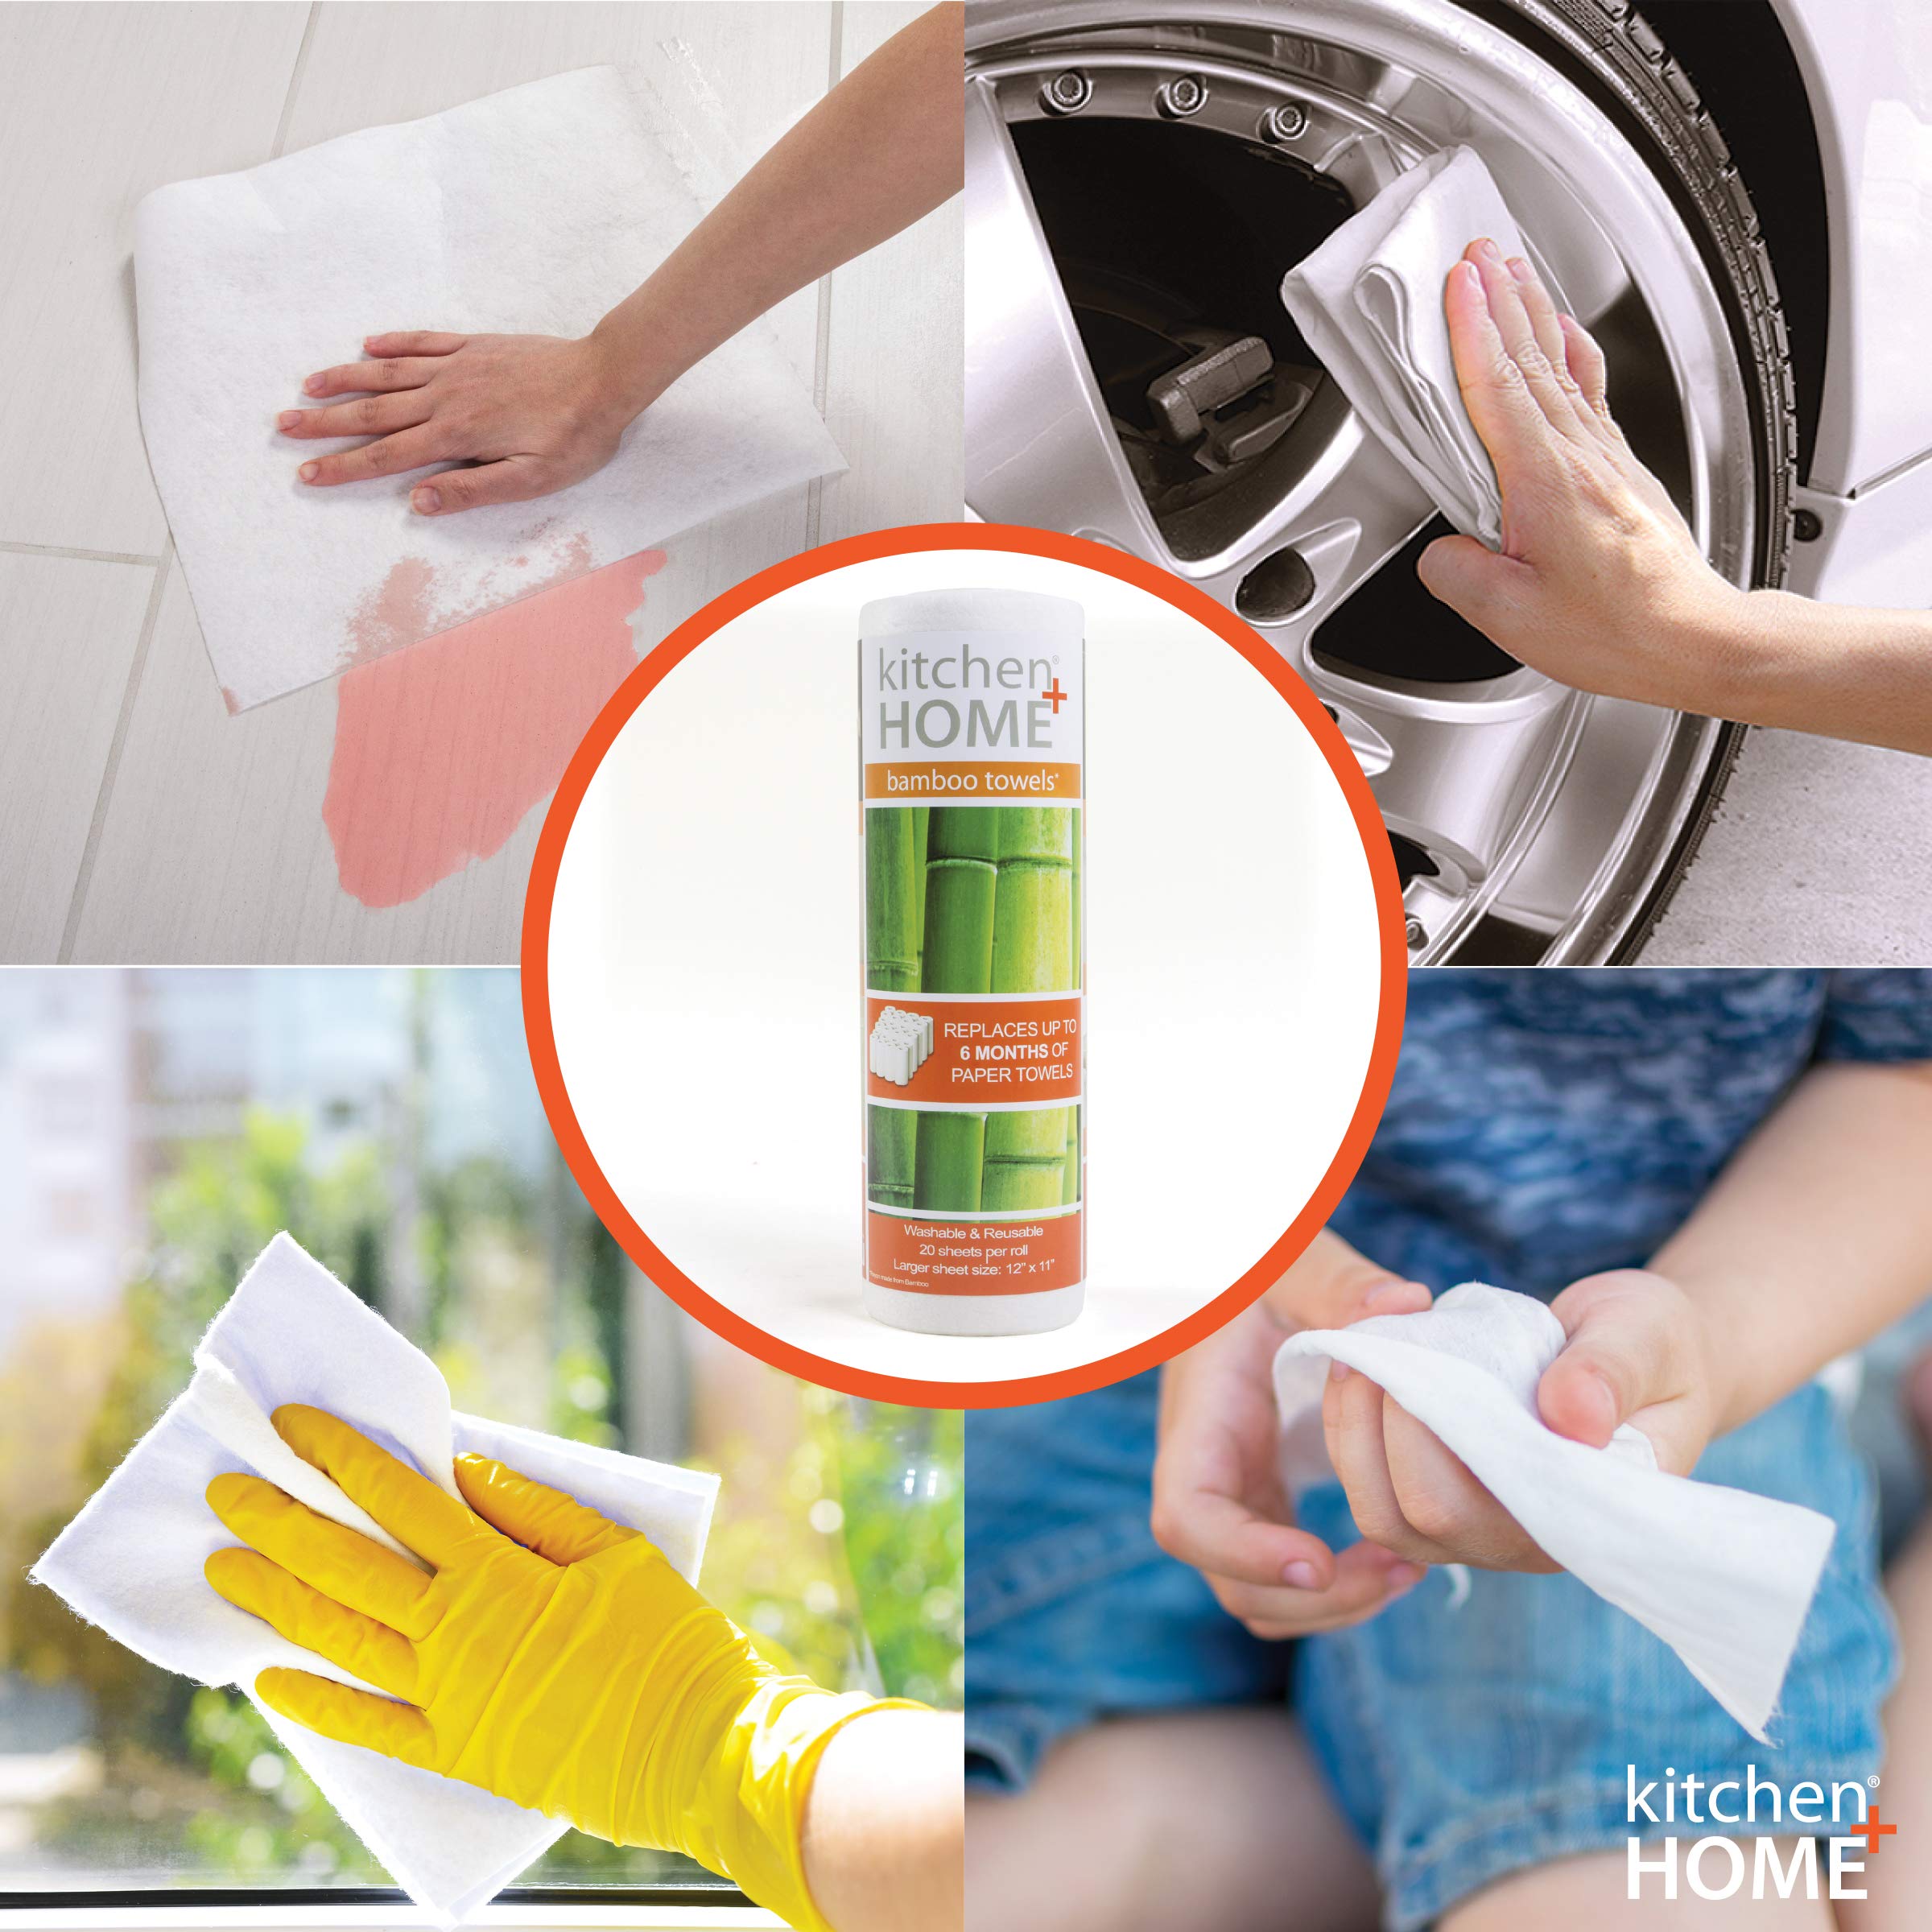 Bamboo Towels - Heavy Duty Machine Washable Reusable Rayon Towels - One roll replaces 6 months of towels! 1 Pack